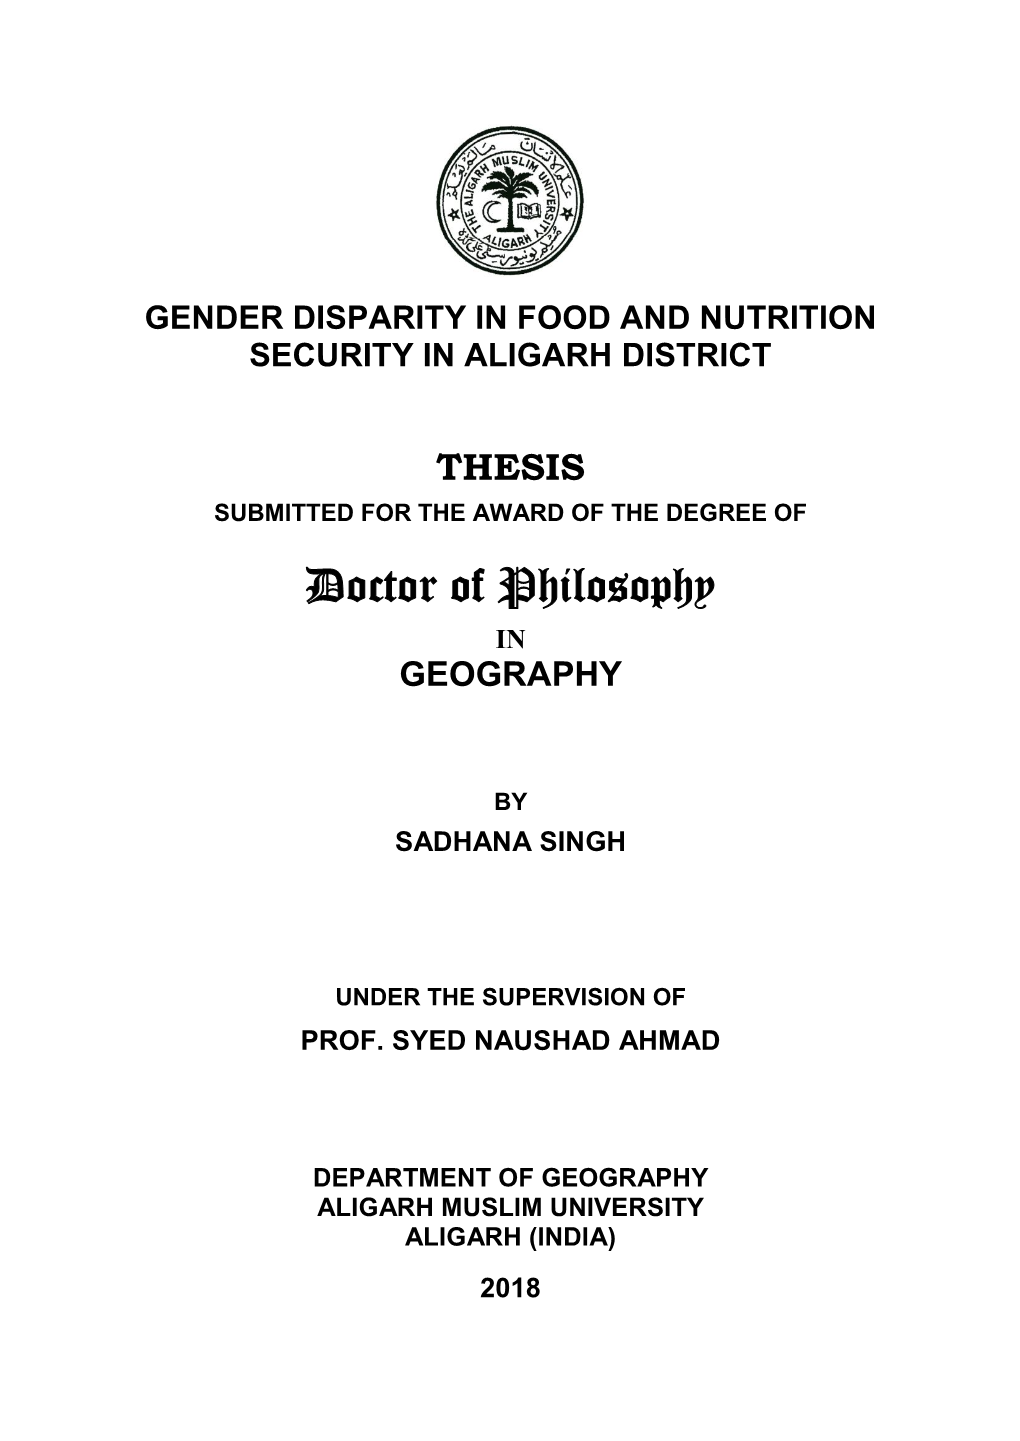 Thesis Submitted for the Award of the Degree Of